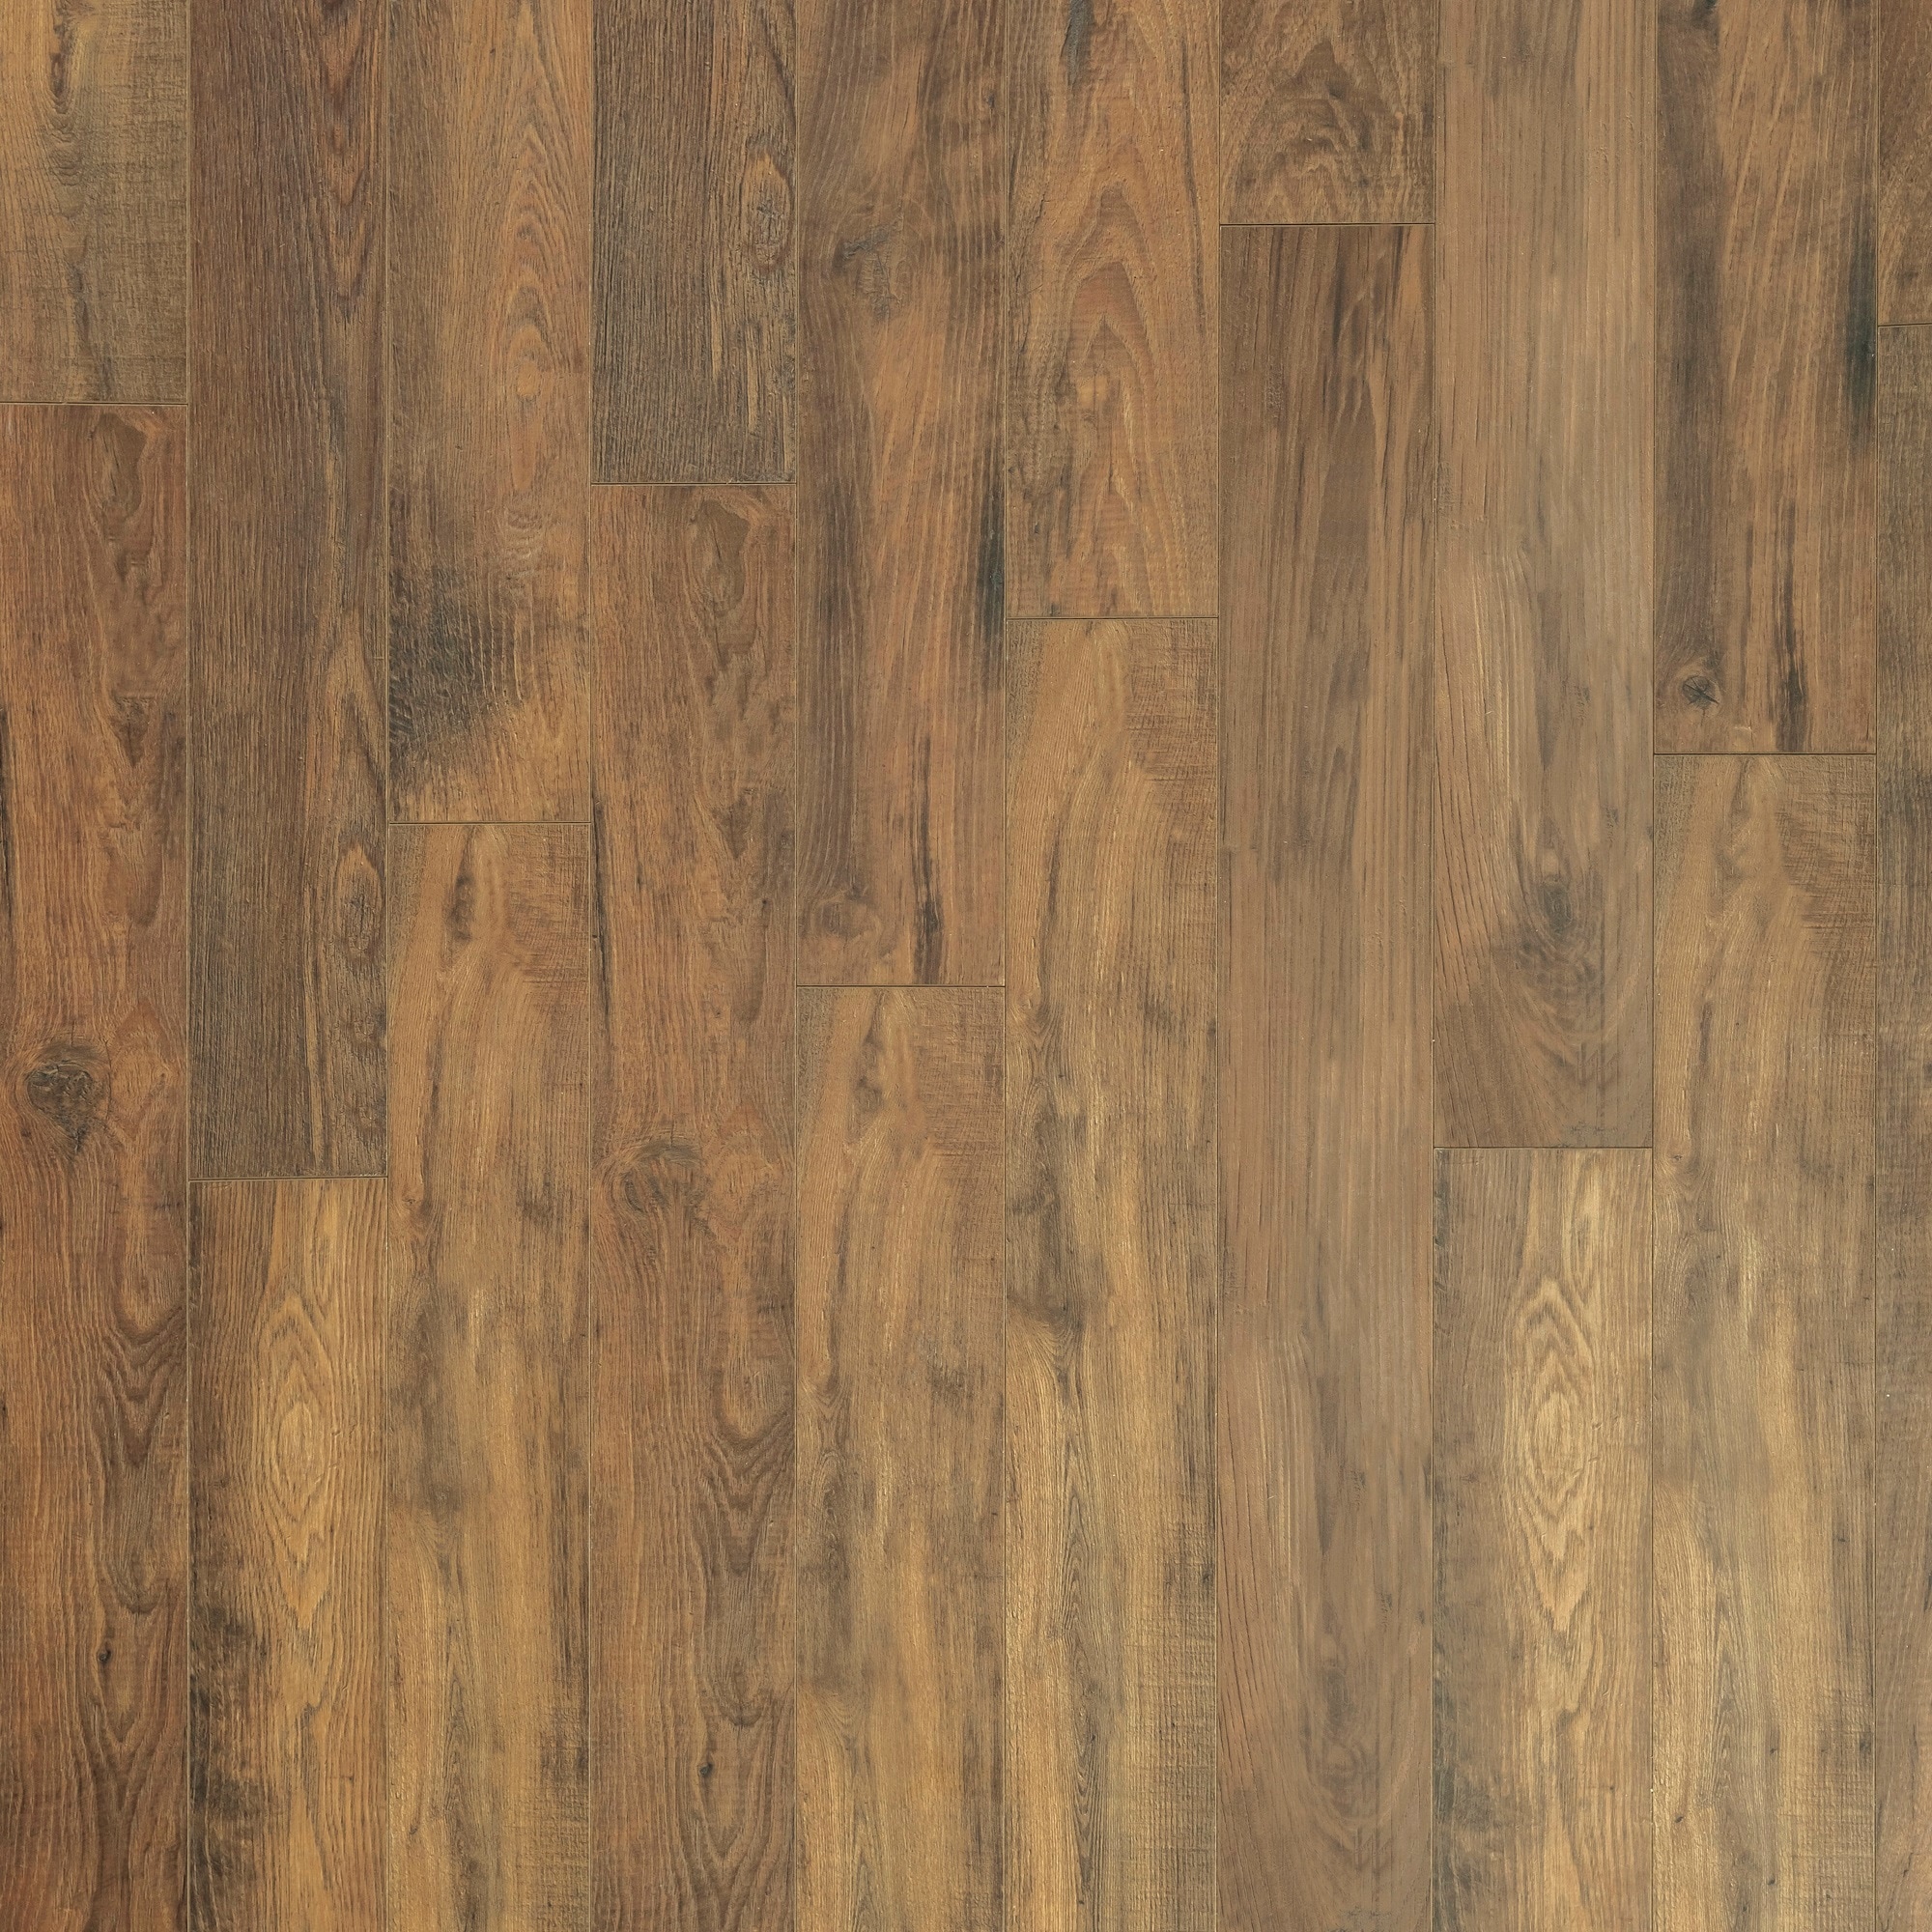 Pergo Classics Vintage Chestnut 10 Mm T X 5 In W 48 L Water Resistant Wood Plank Laminate Flooring The Department At Lowes Com